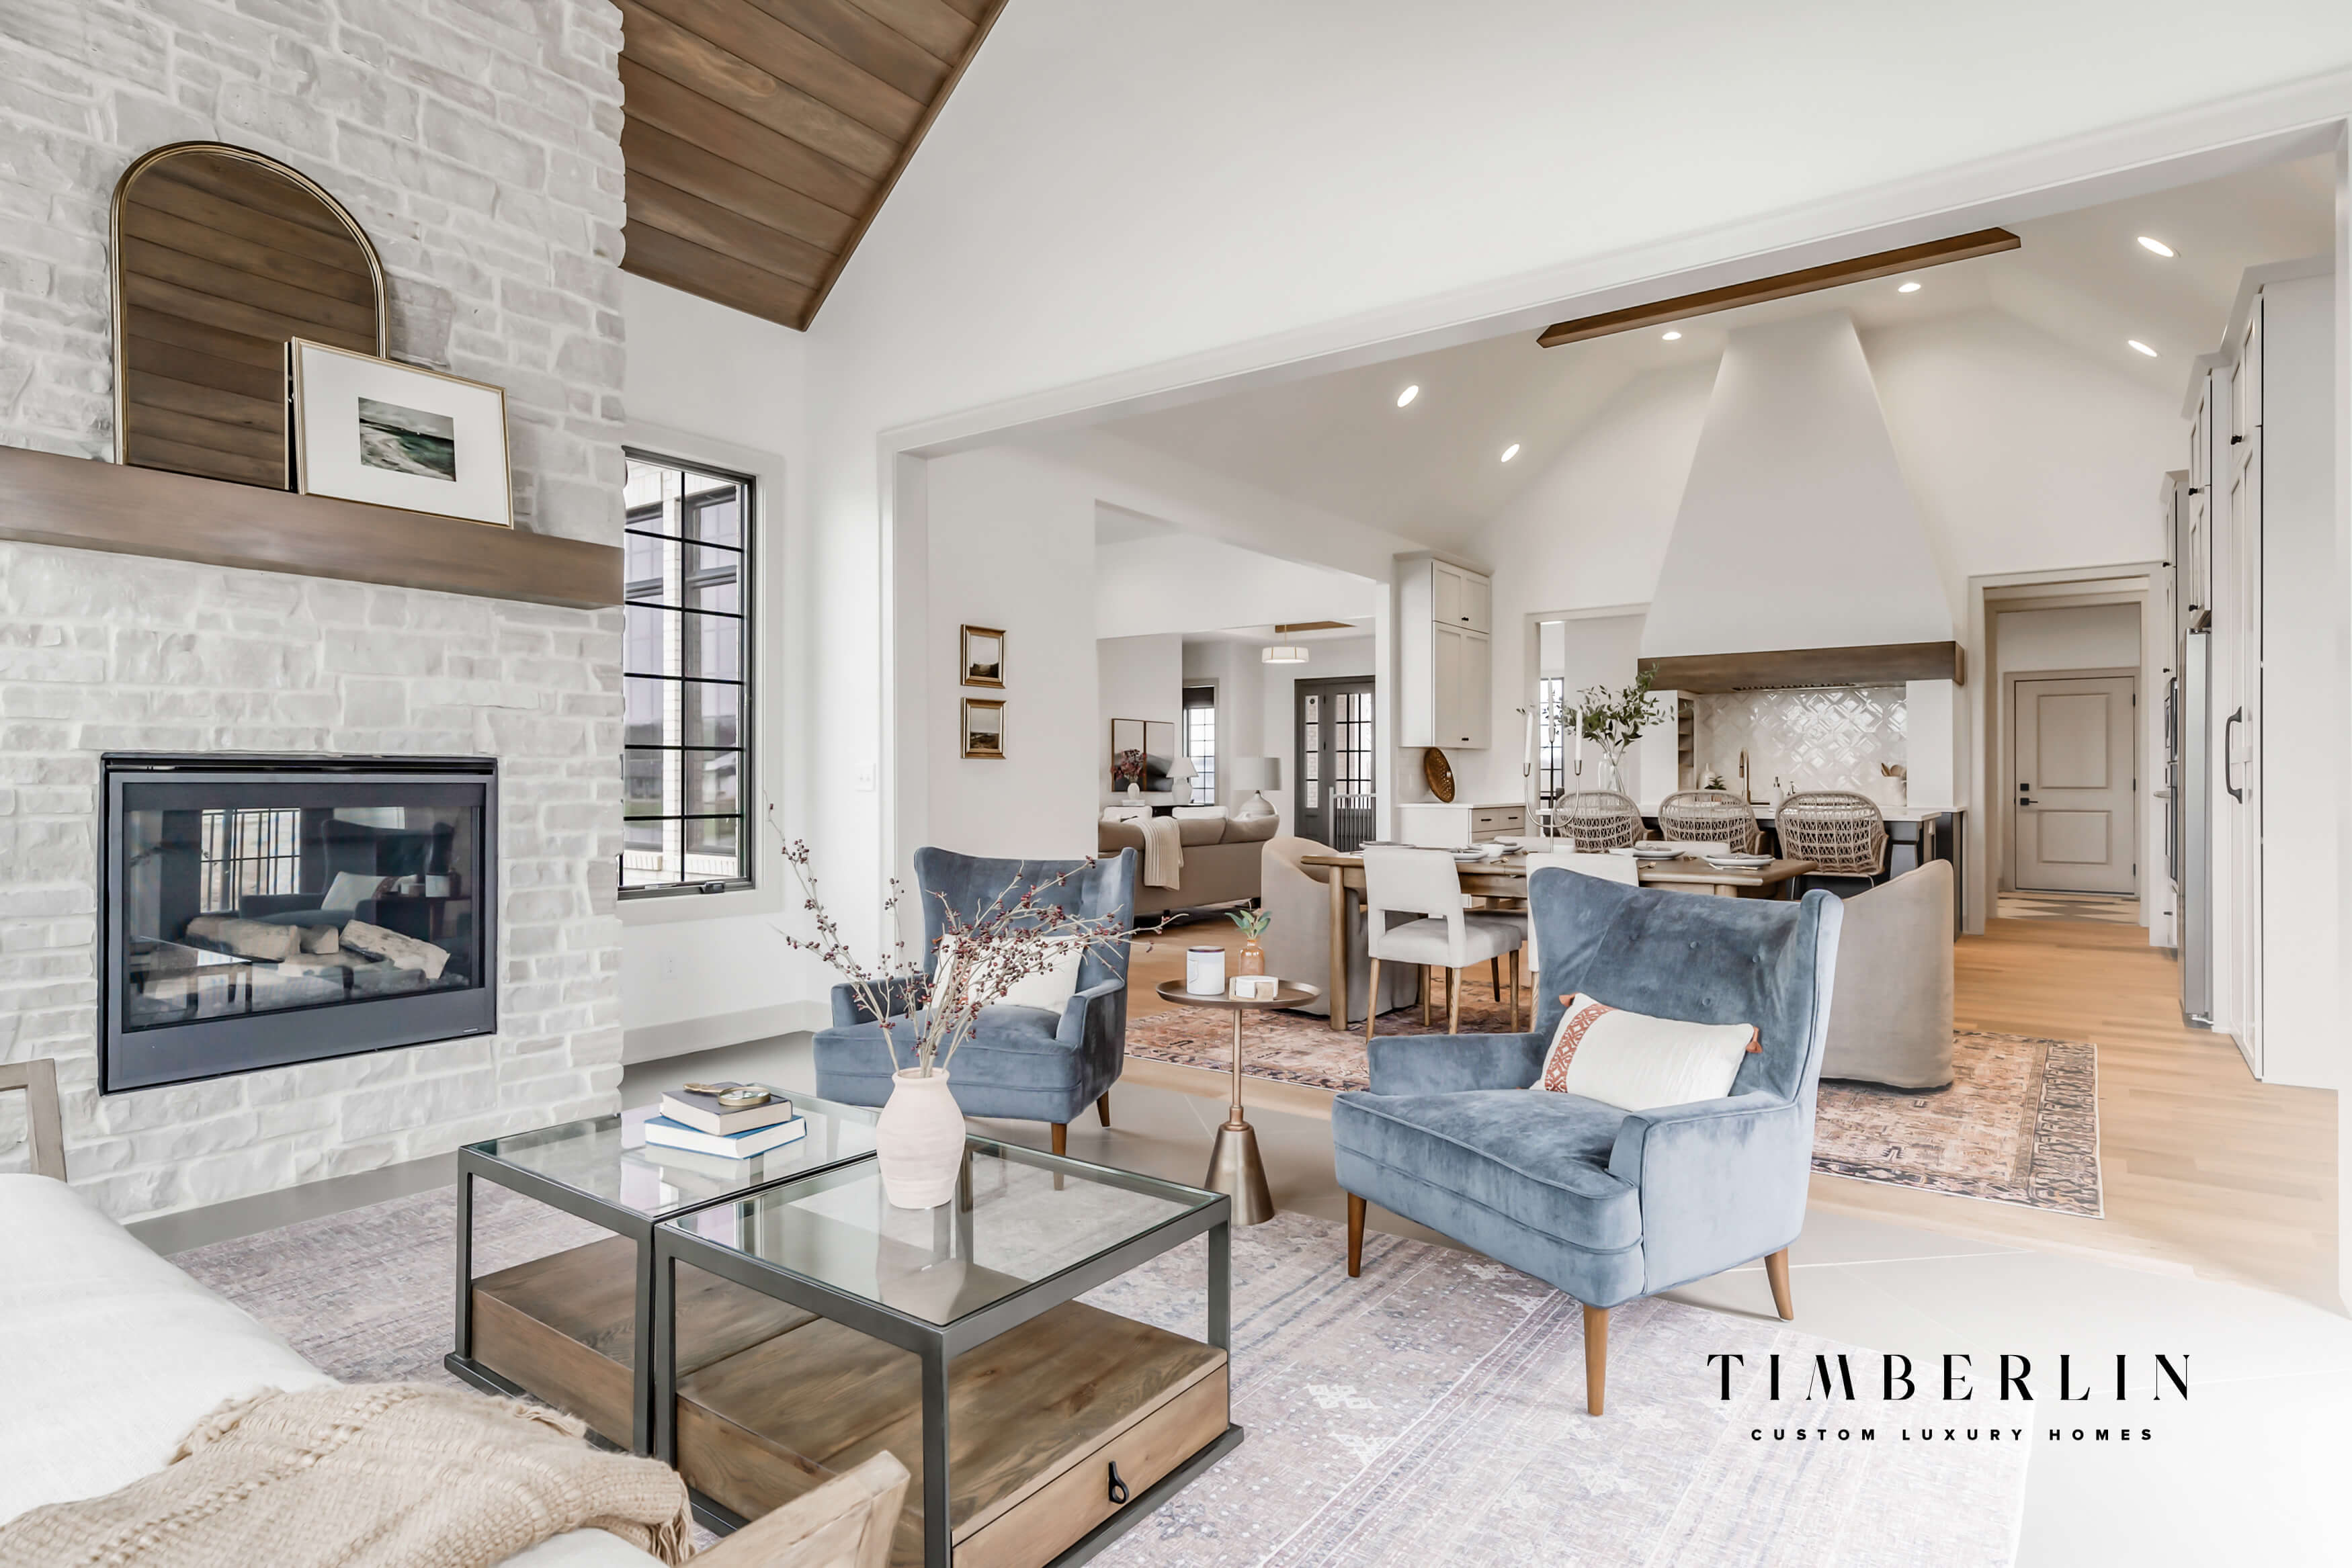 Timberlin Luxury Homes of Greater Fort Wayne